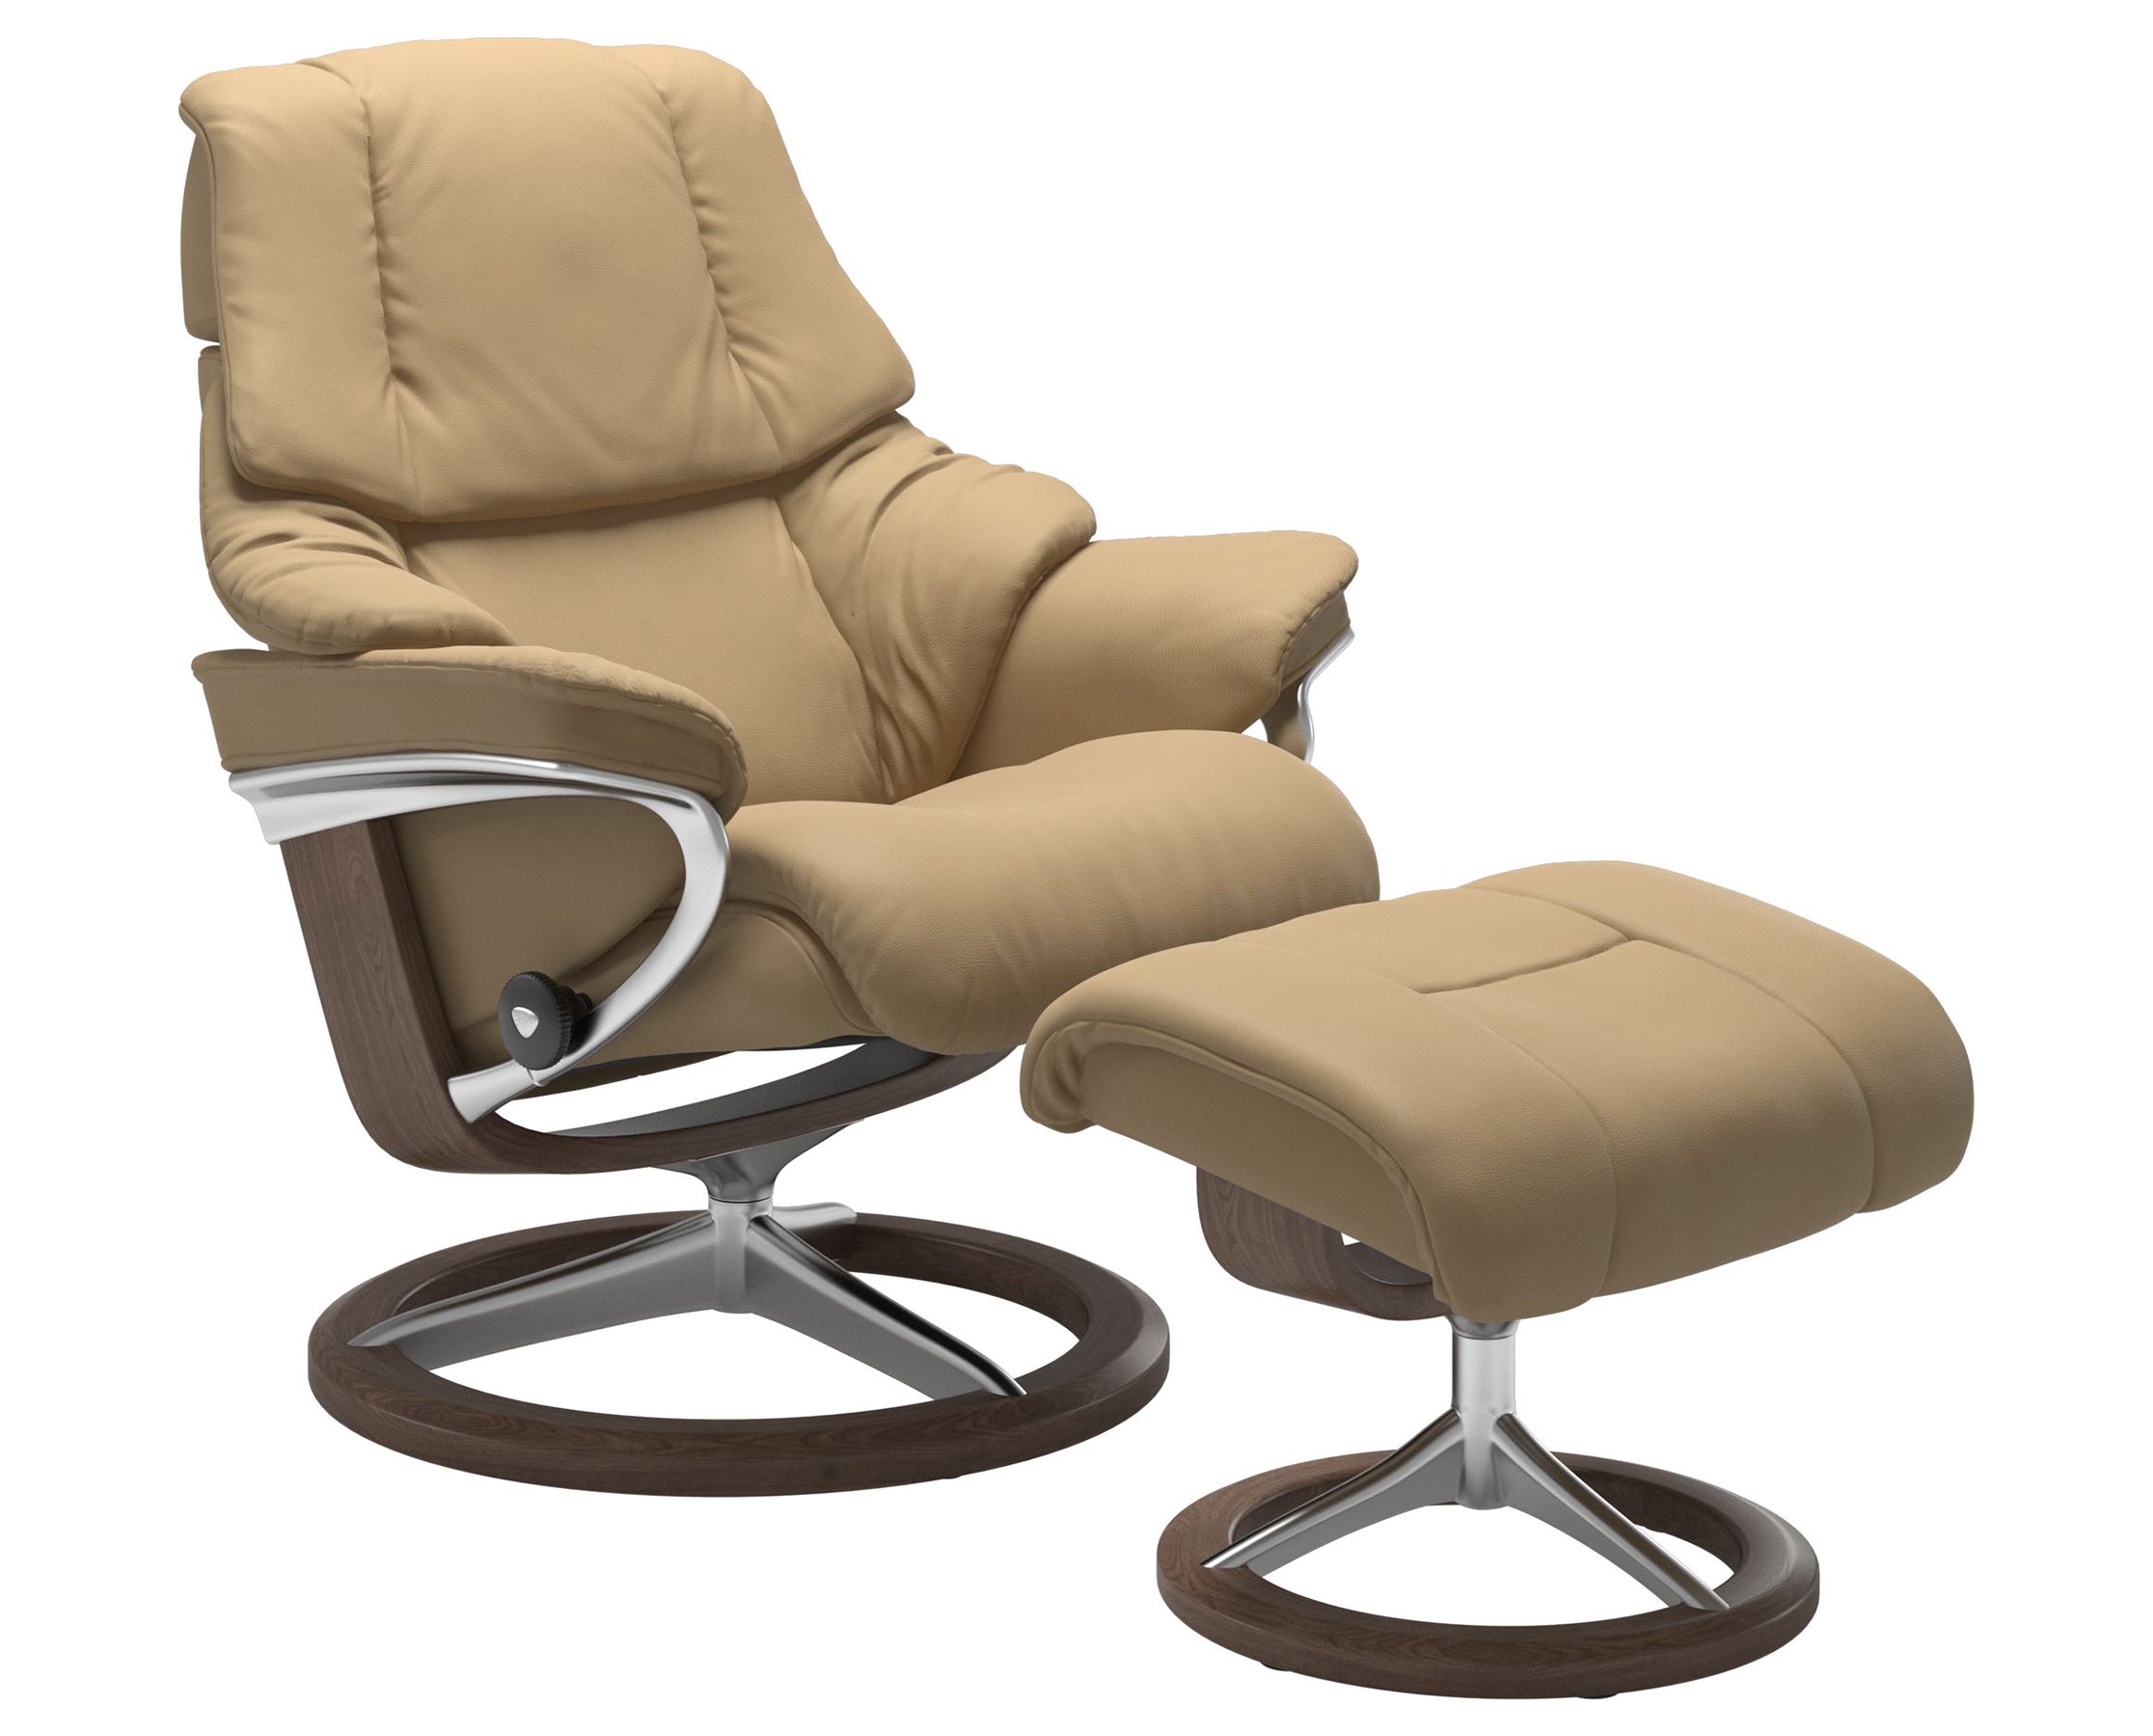 Paloma Leather Sand S/M/L and Walnut Base | Stressless Reno Signature Recliner | Valley Ridge Furniture